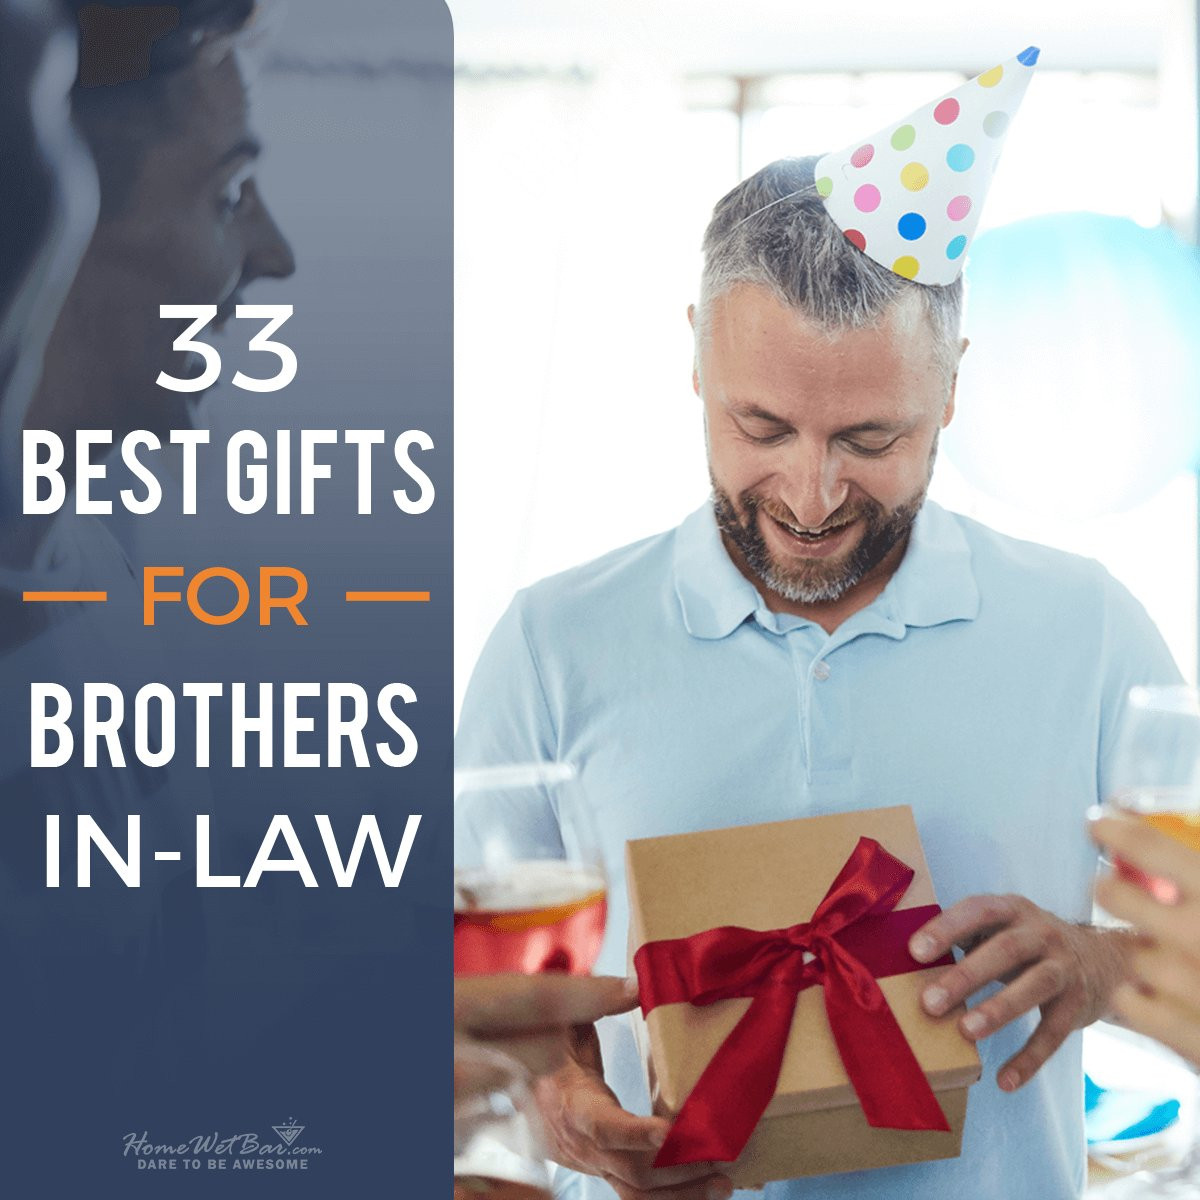 Gift Ideas For Brother In Law Birthday
 33 Best Gifts for Brothers in Law